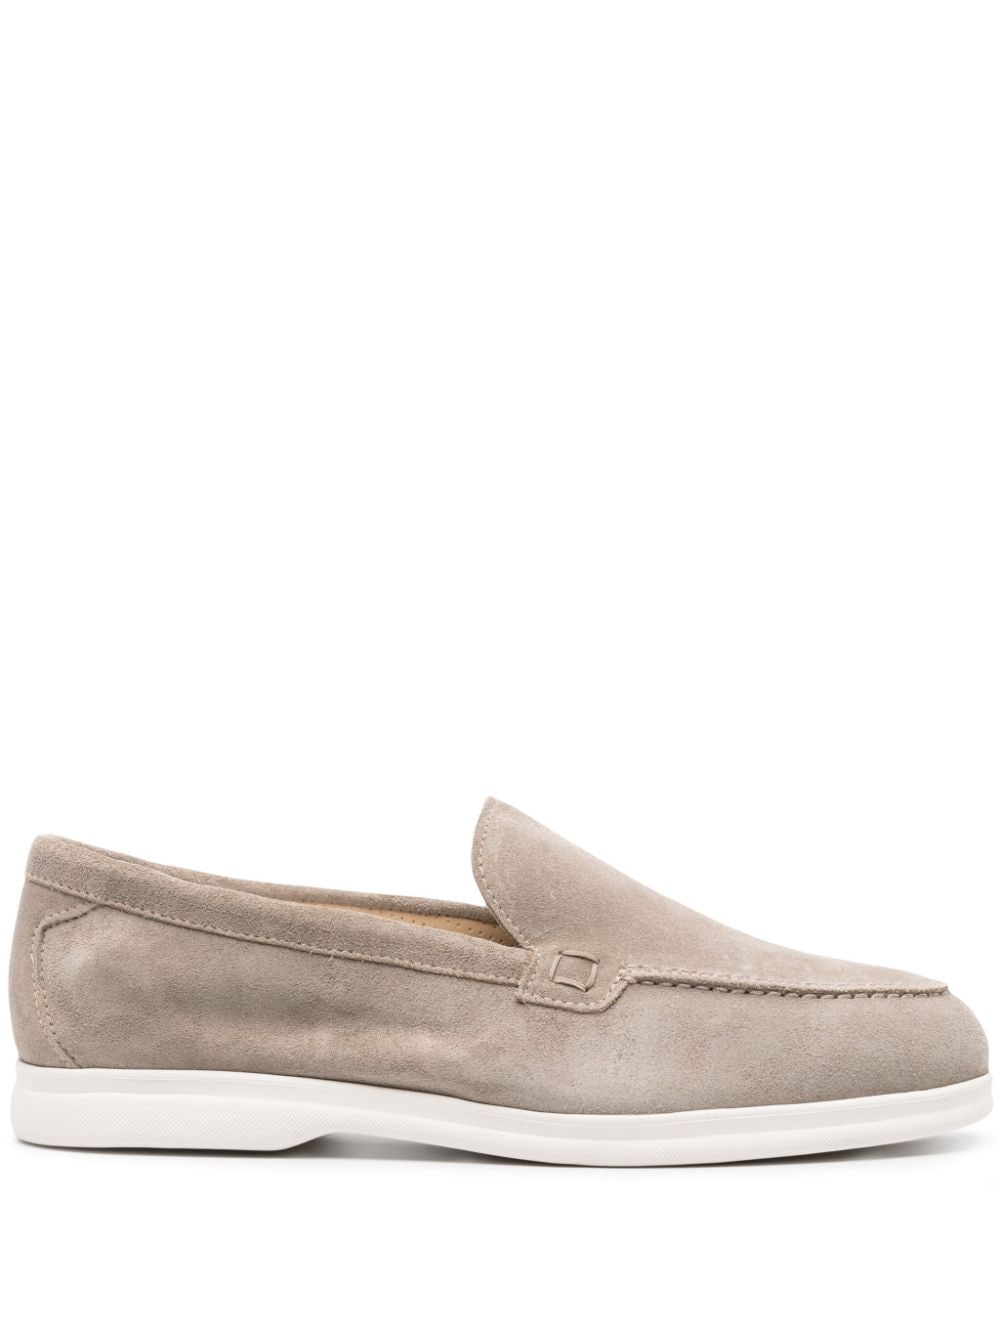 Doucal's almond-toe suede loafers - Grey von Doucal's